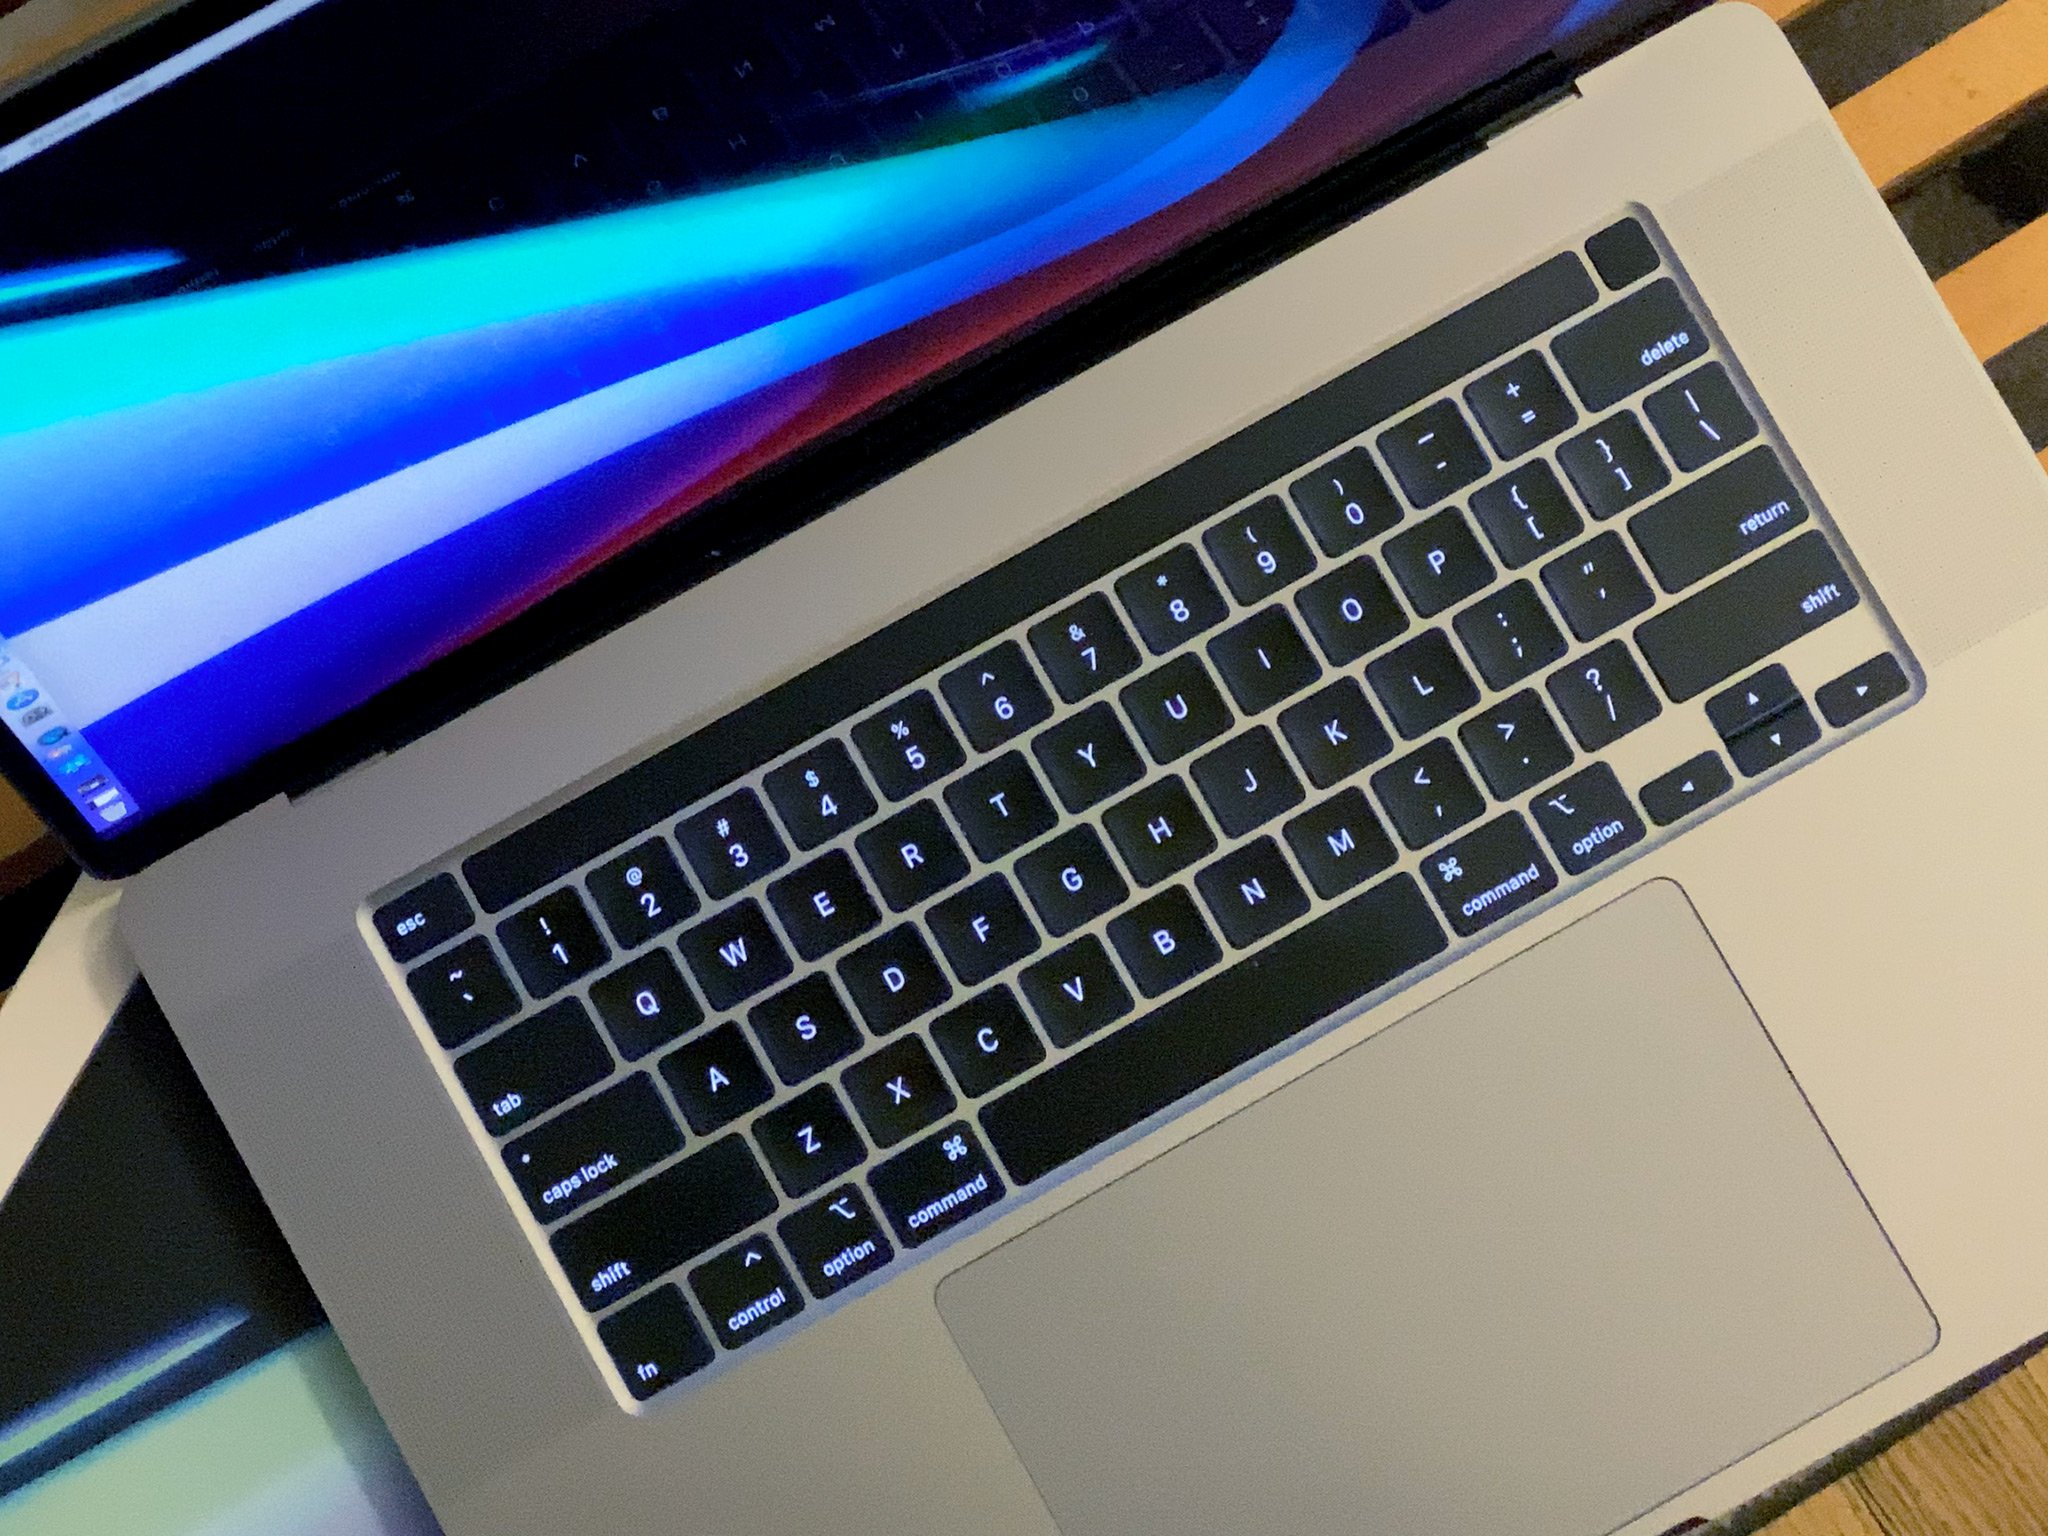  Macbook Pro Review: Keyboard Track Pad and Touch Bar 